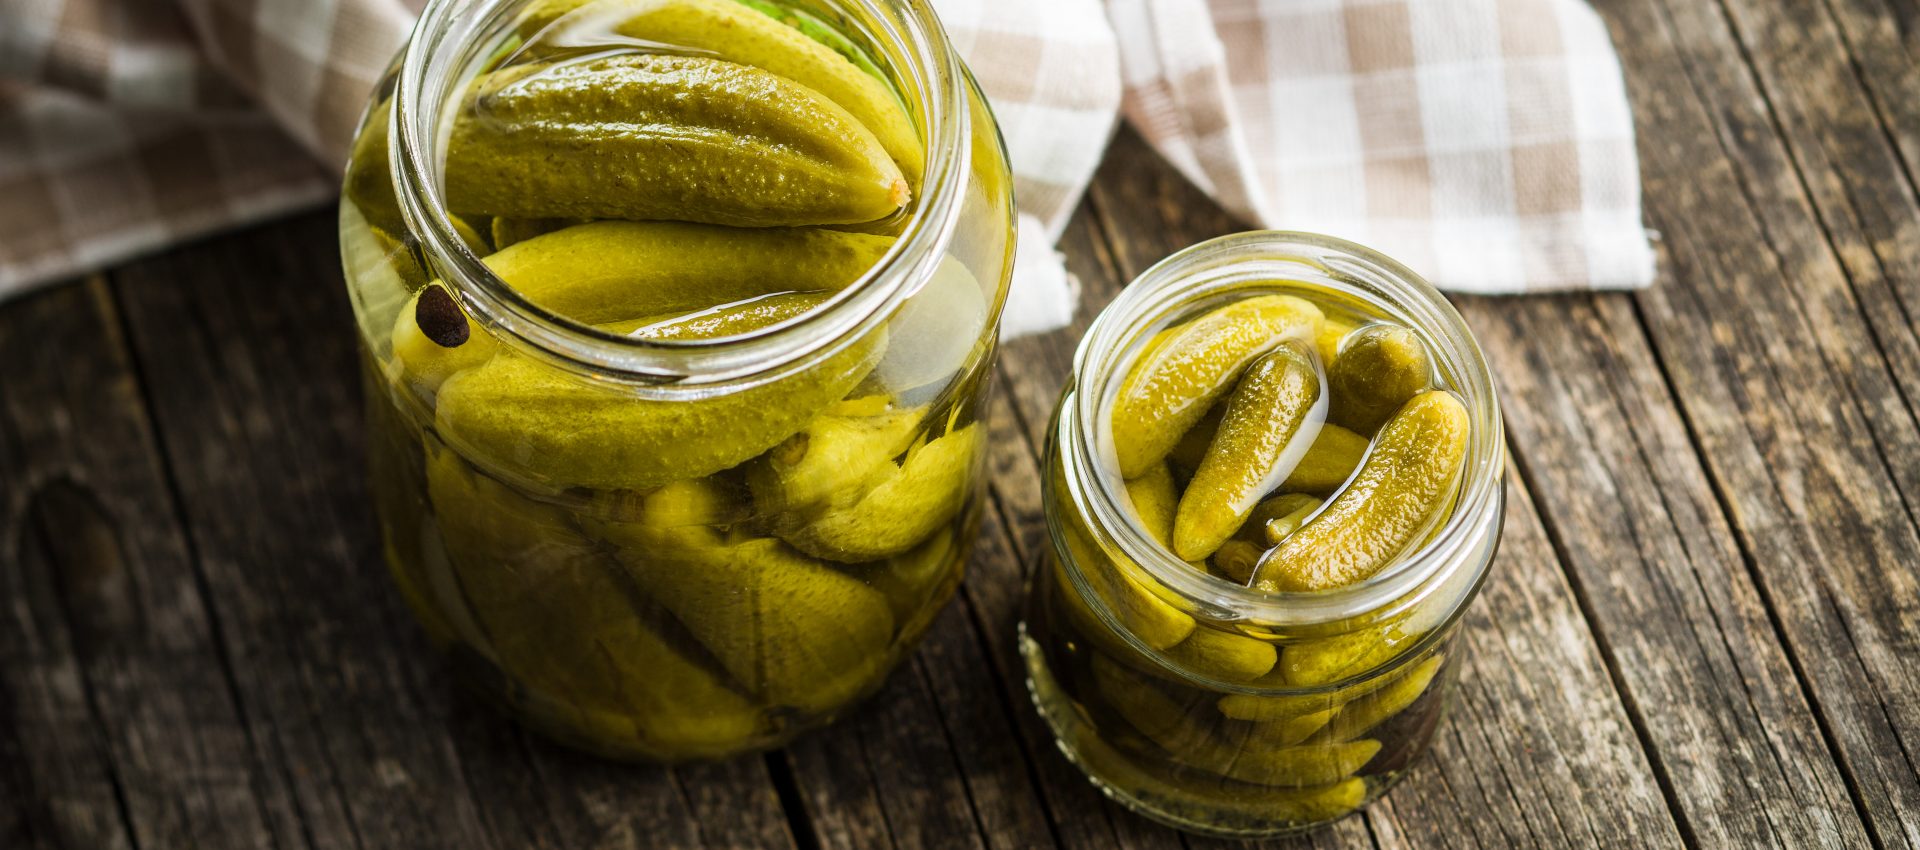 James Reinneck’s White Ribbon Bread and Butter Pickles